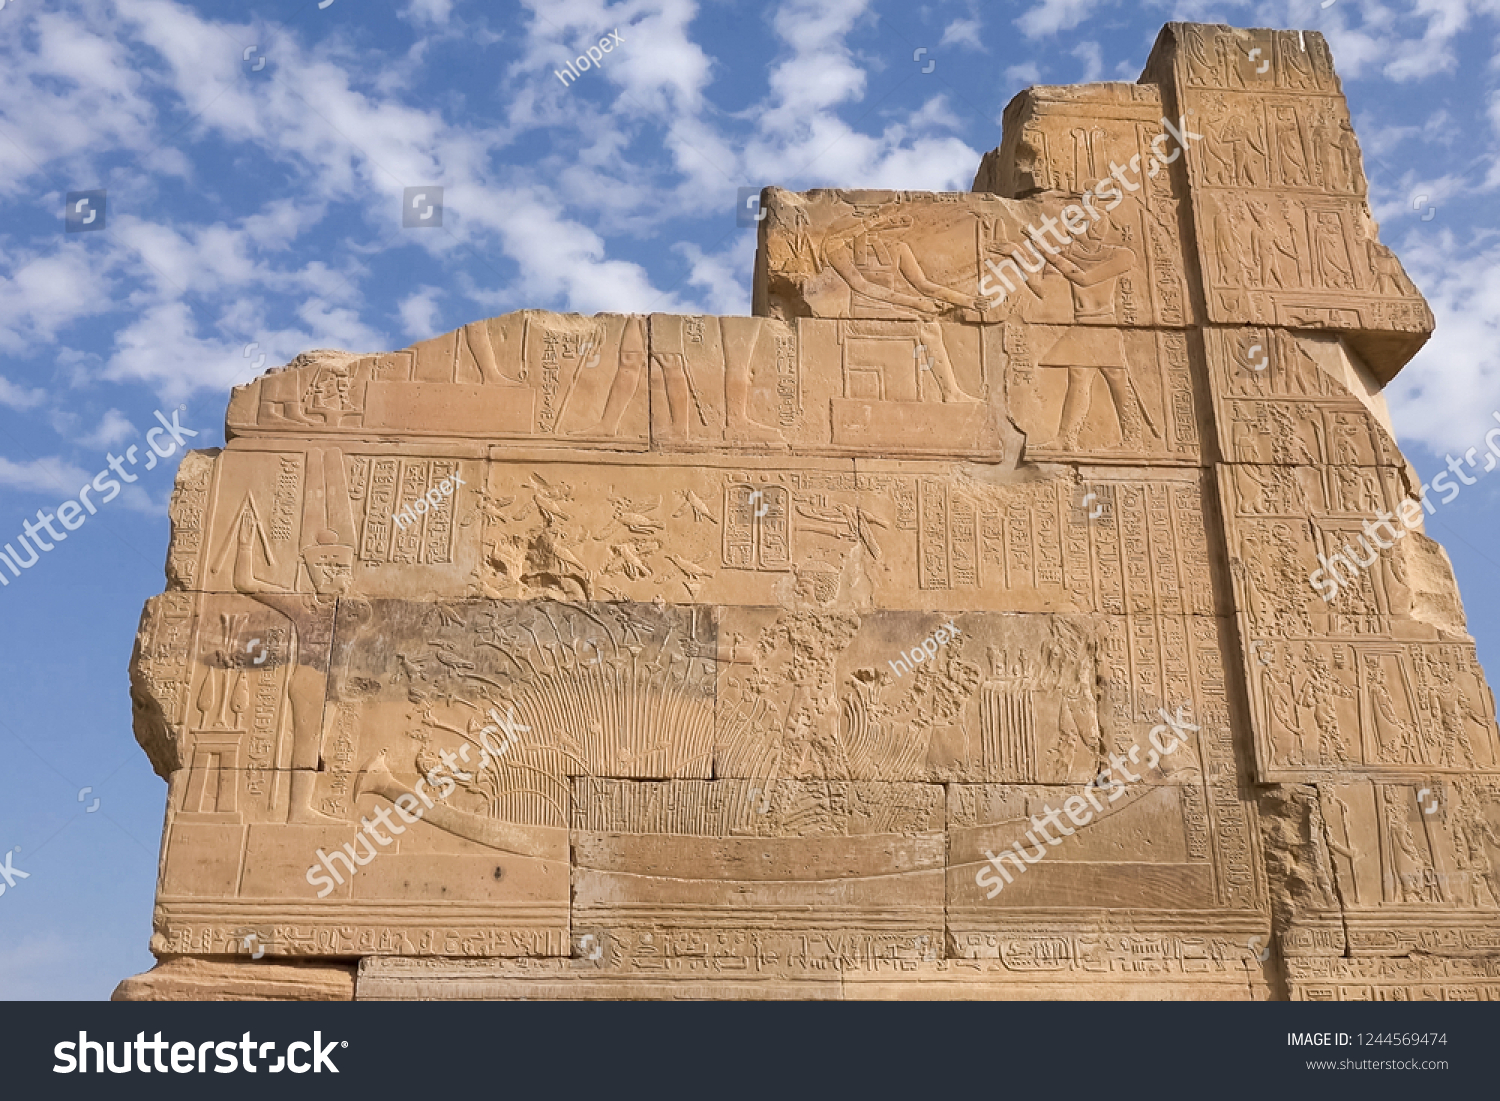 Egyptian hieroglyphs and drawings on the walls and columns. Egyptian language, The life of ancient gods and people in hieroglyphics and drawings #1244569474